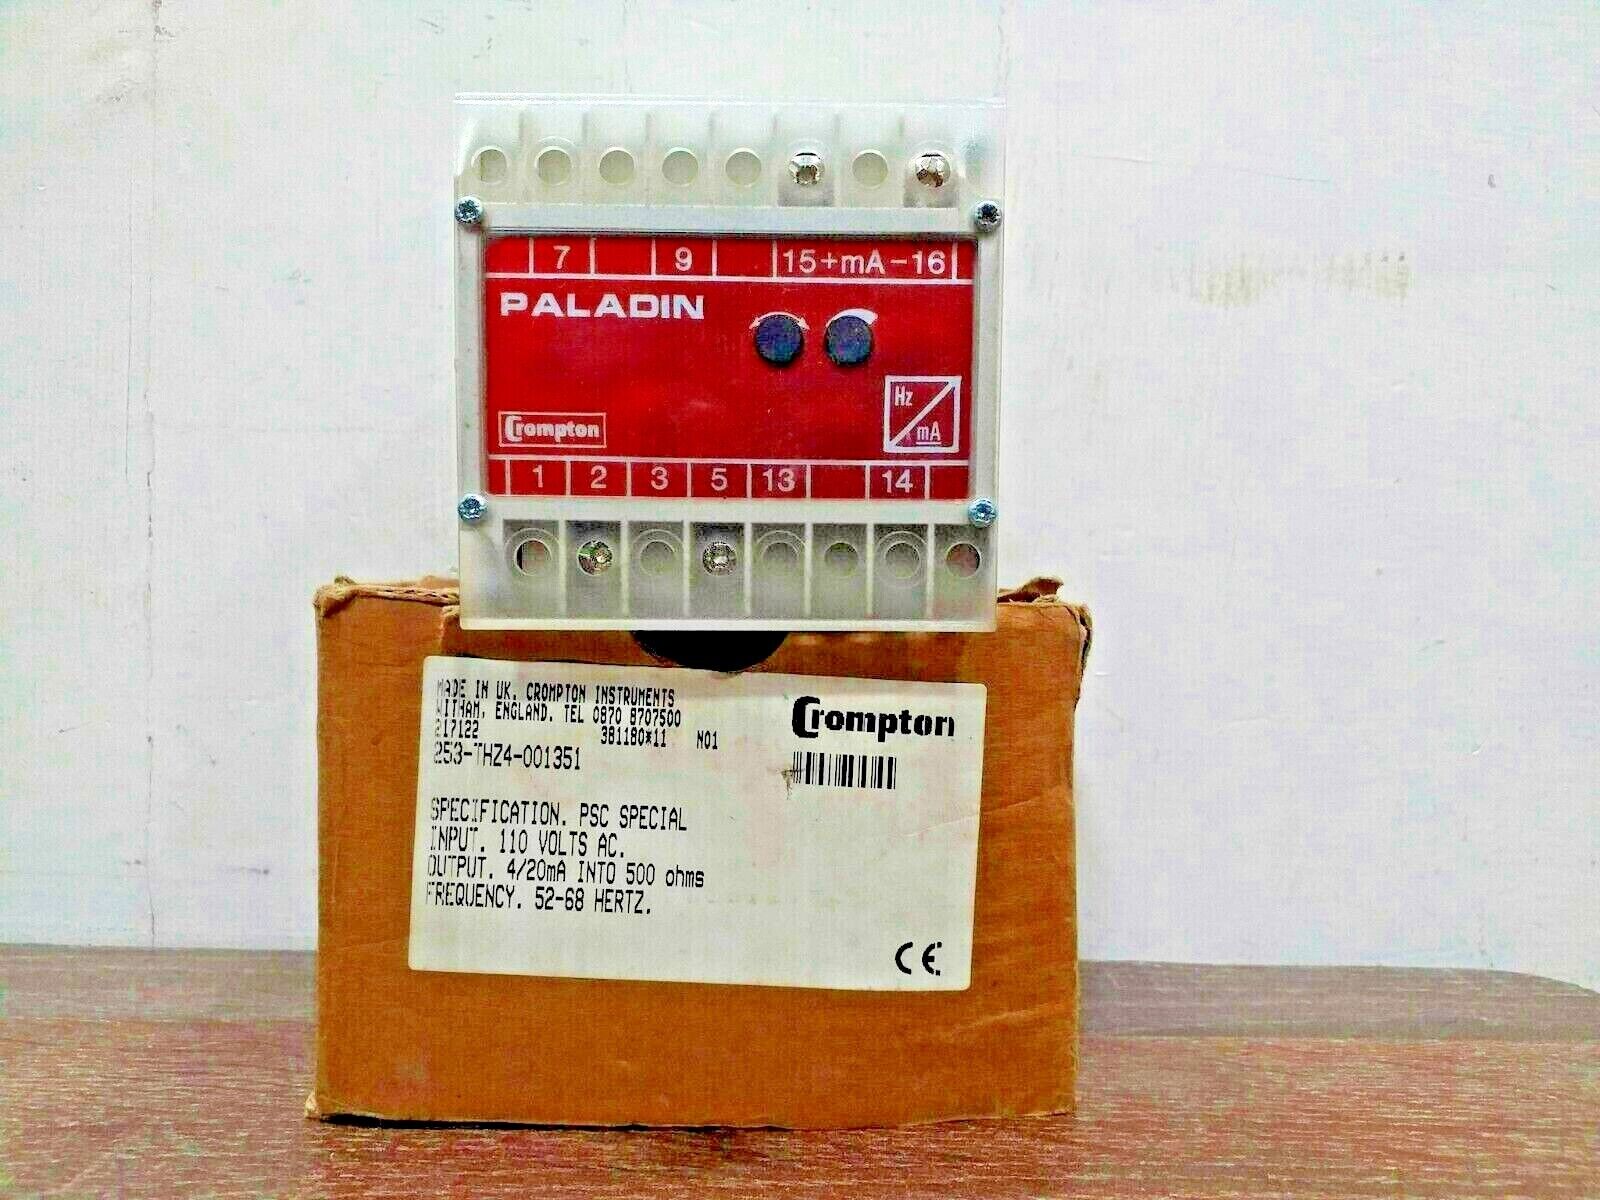 CROMPTON PALADIN 253-THZ4-001351 FREQUENCY TRANSDUCER